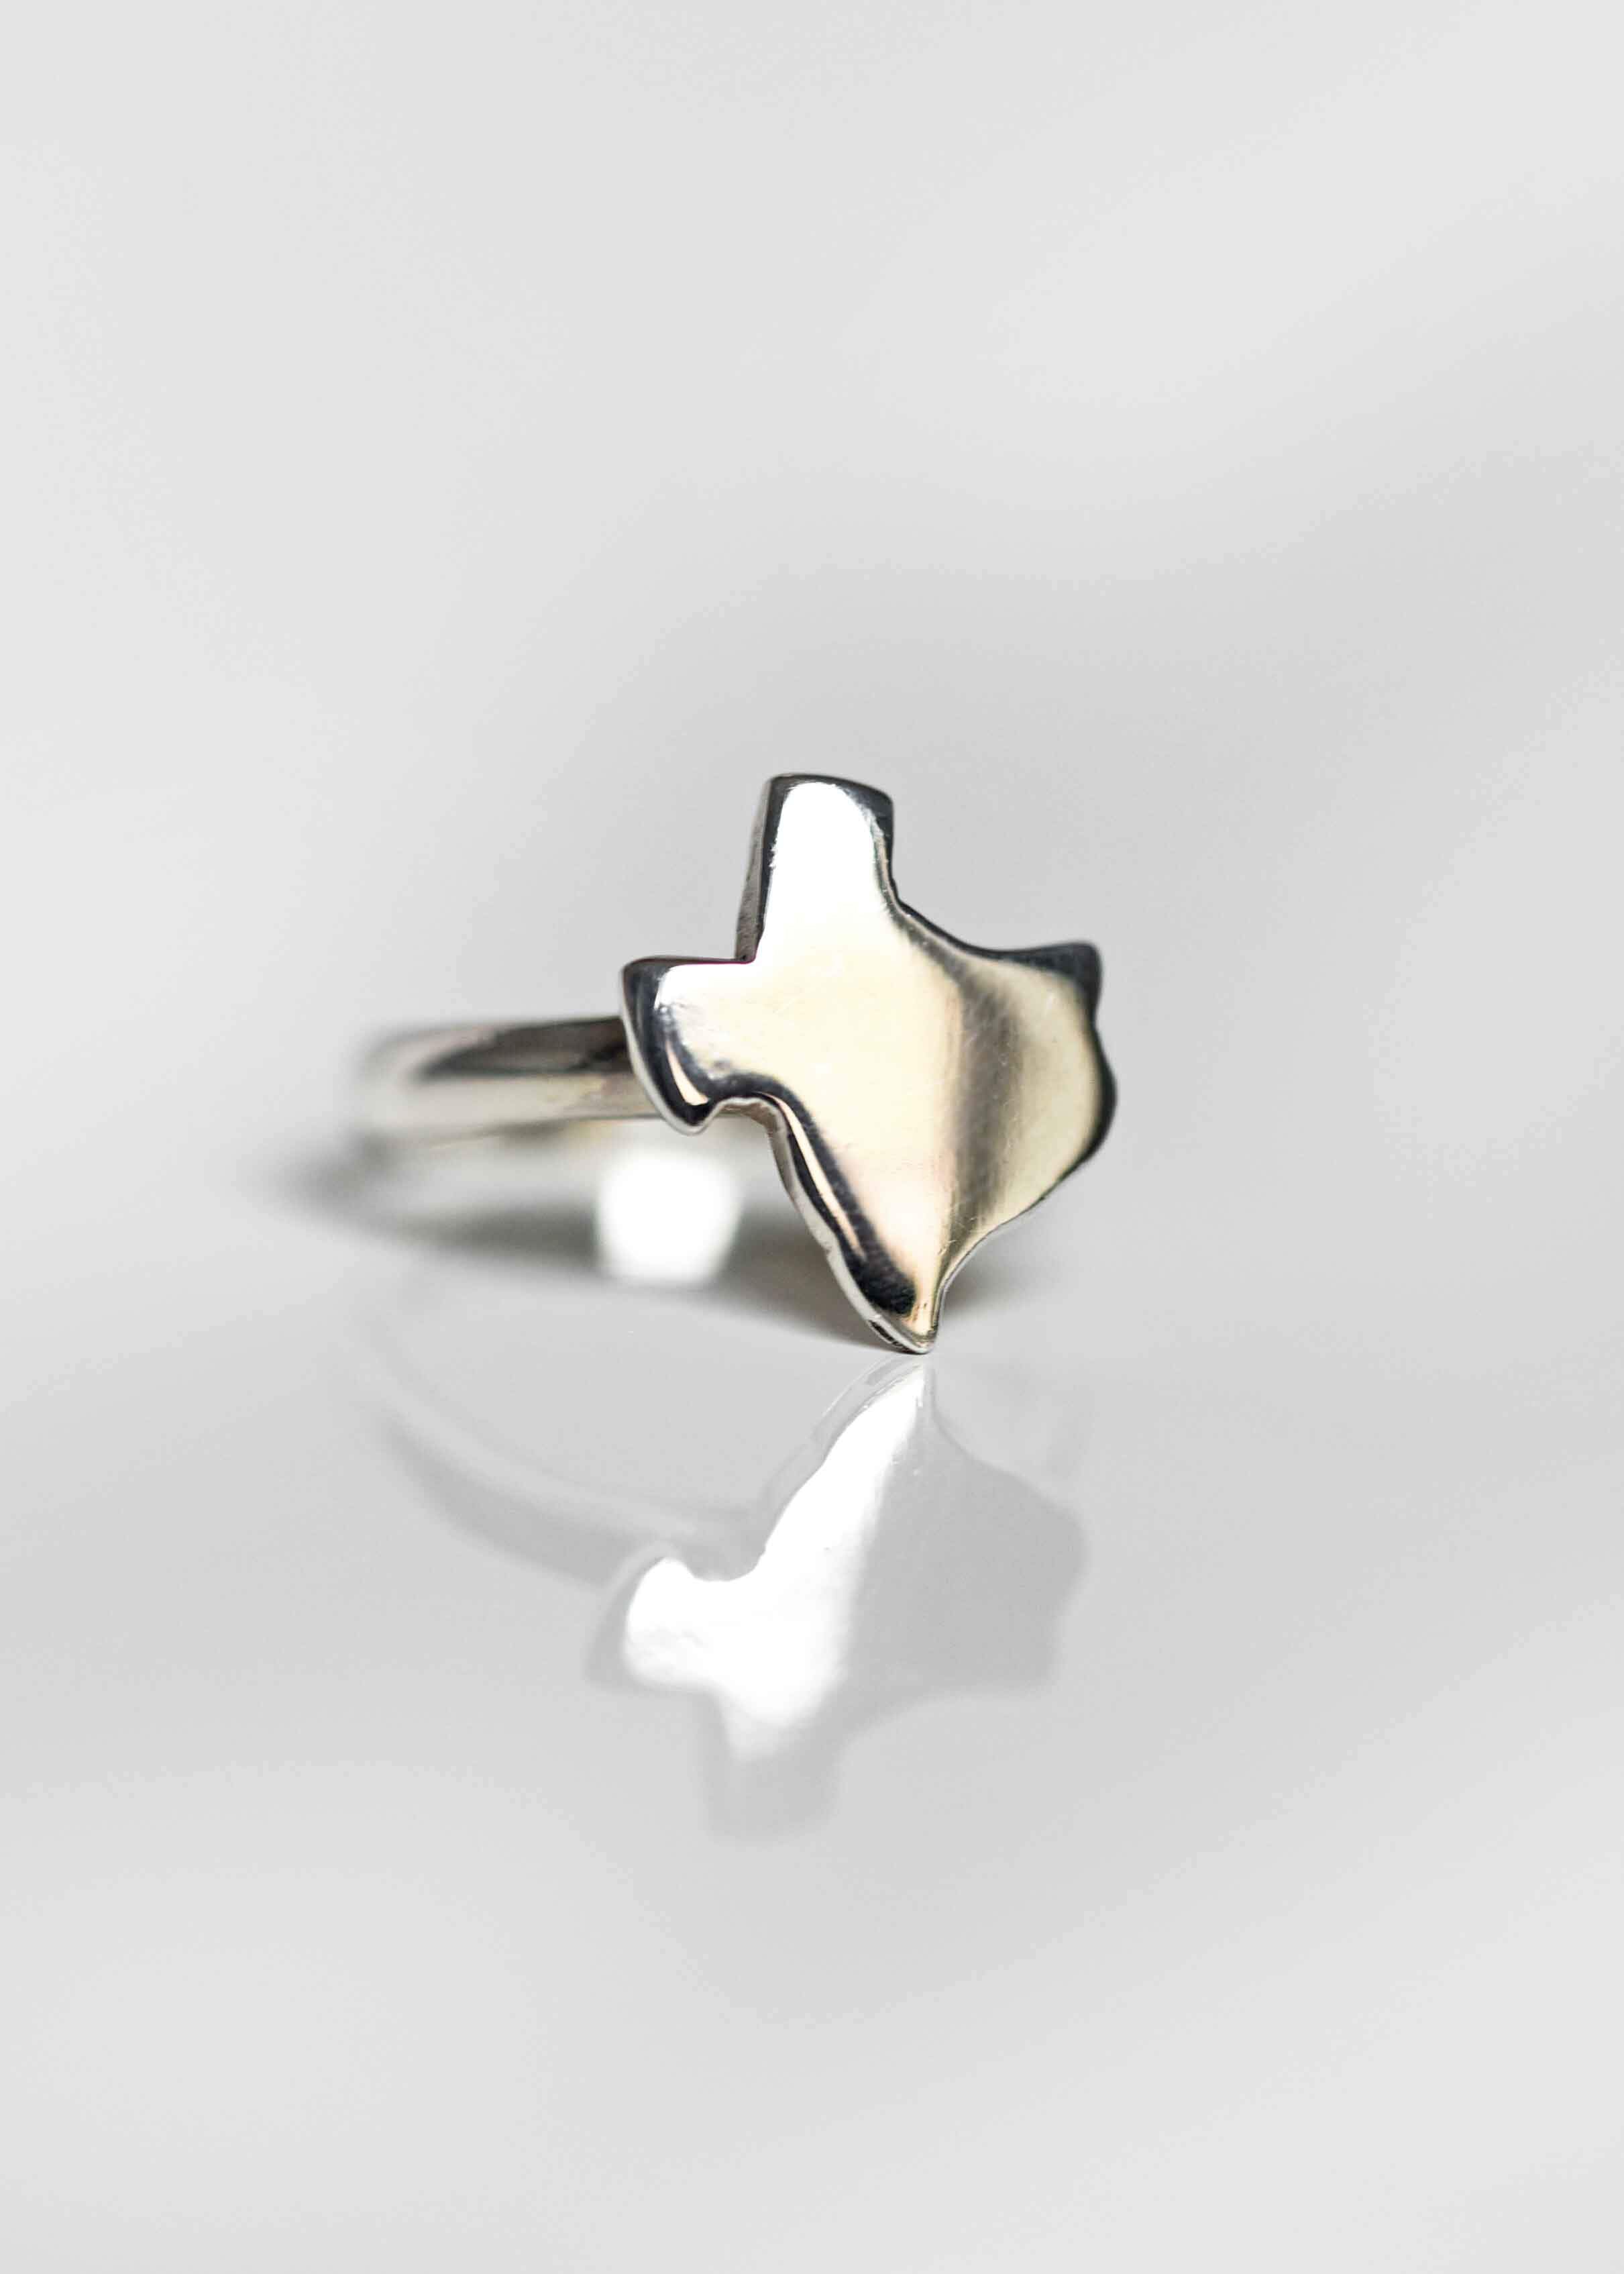 sterling silver Texas ring, texas shape ring, texas jewelry